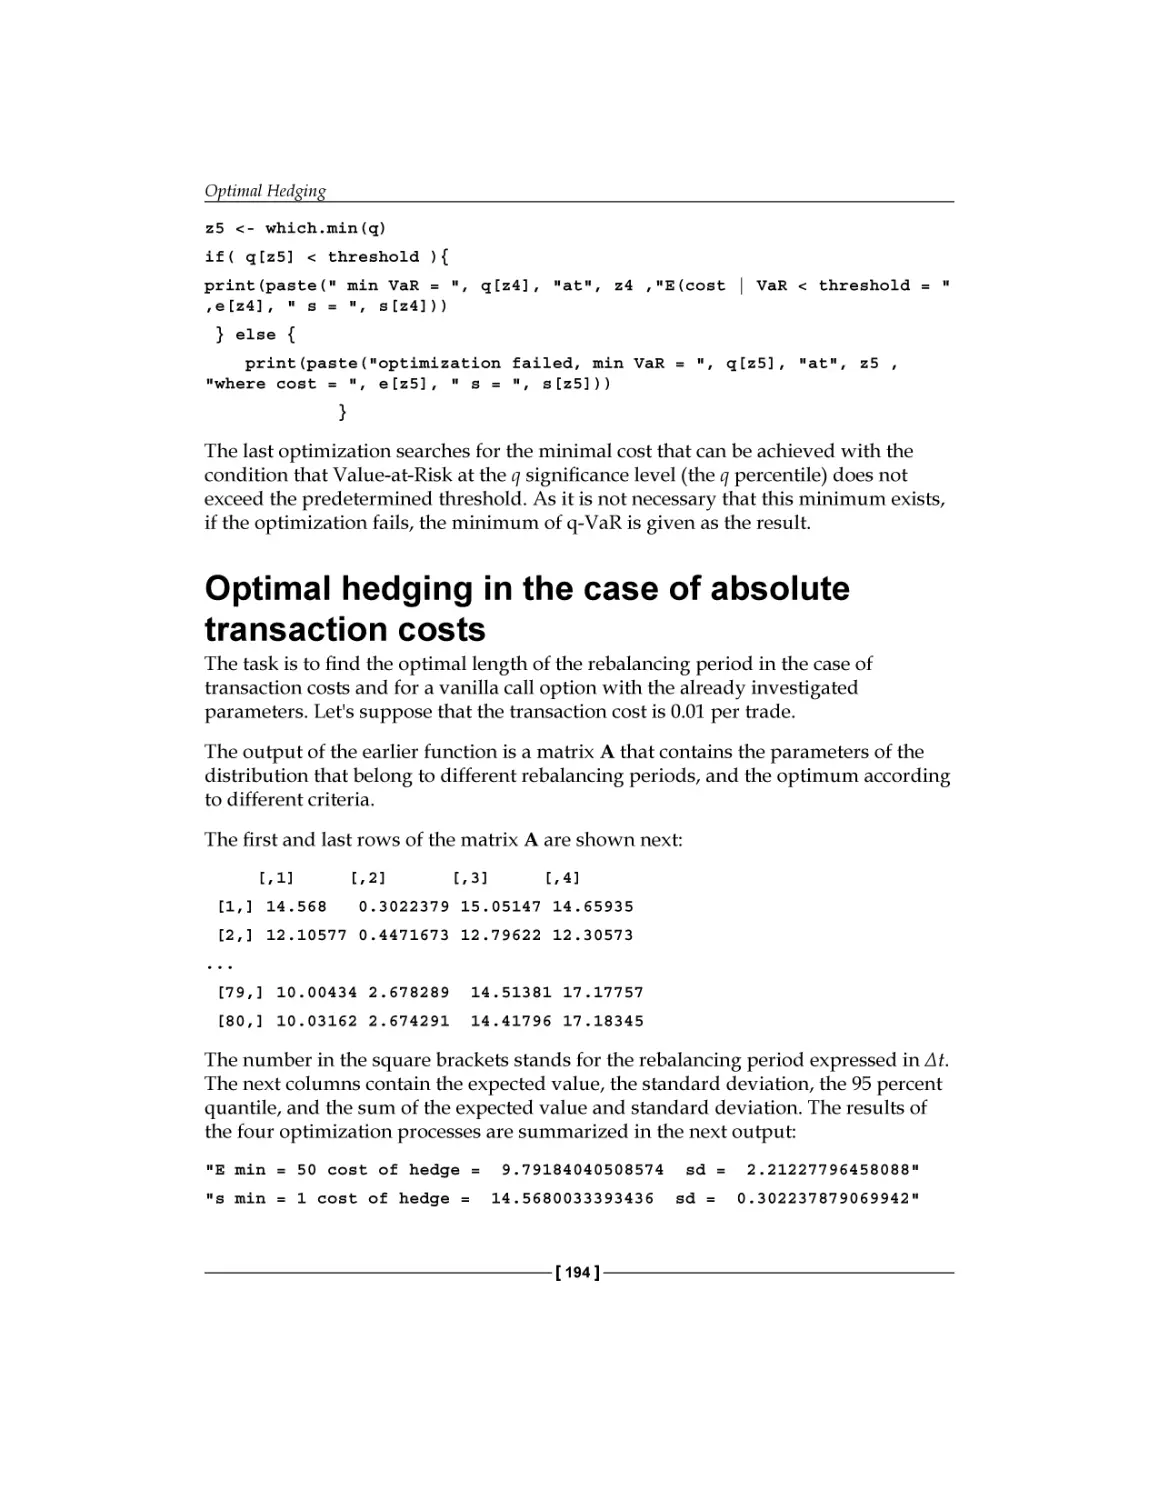 Optimal hedging in the case of absolute transaction costs